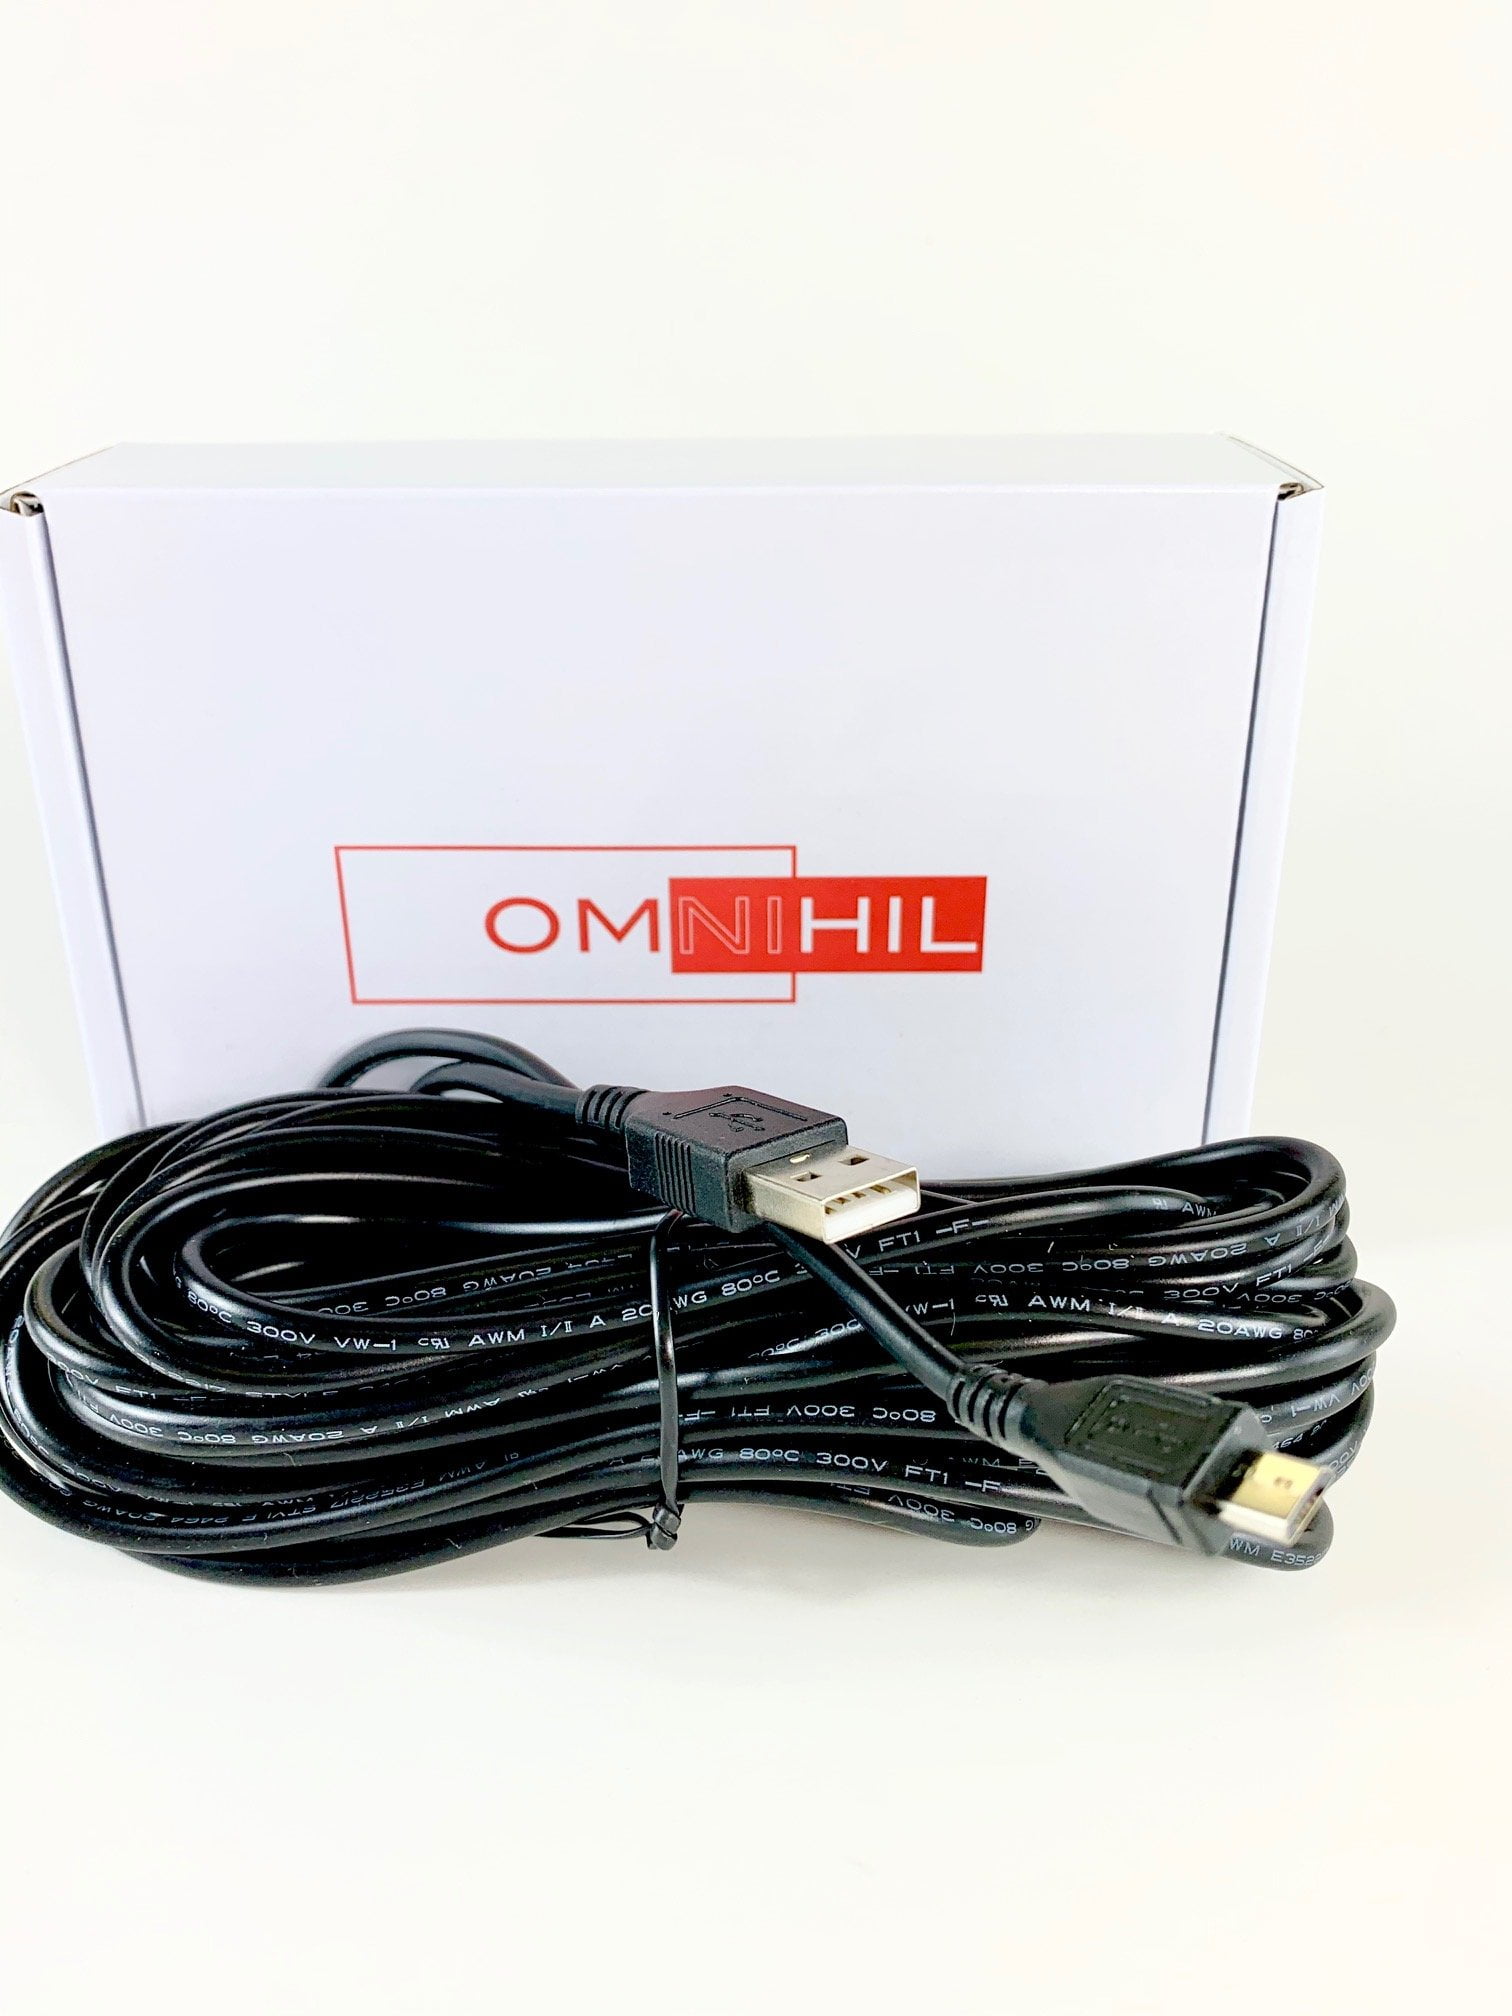 OMNIHIL 8 Feet Long High Speed USB 2.0 Cable Compatible with Zebra ZM400